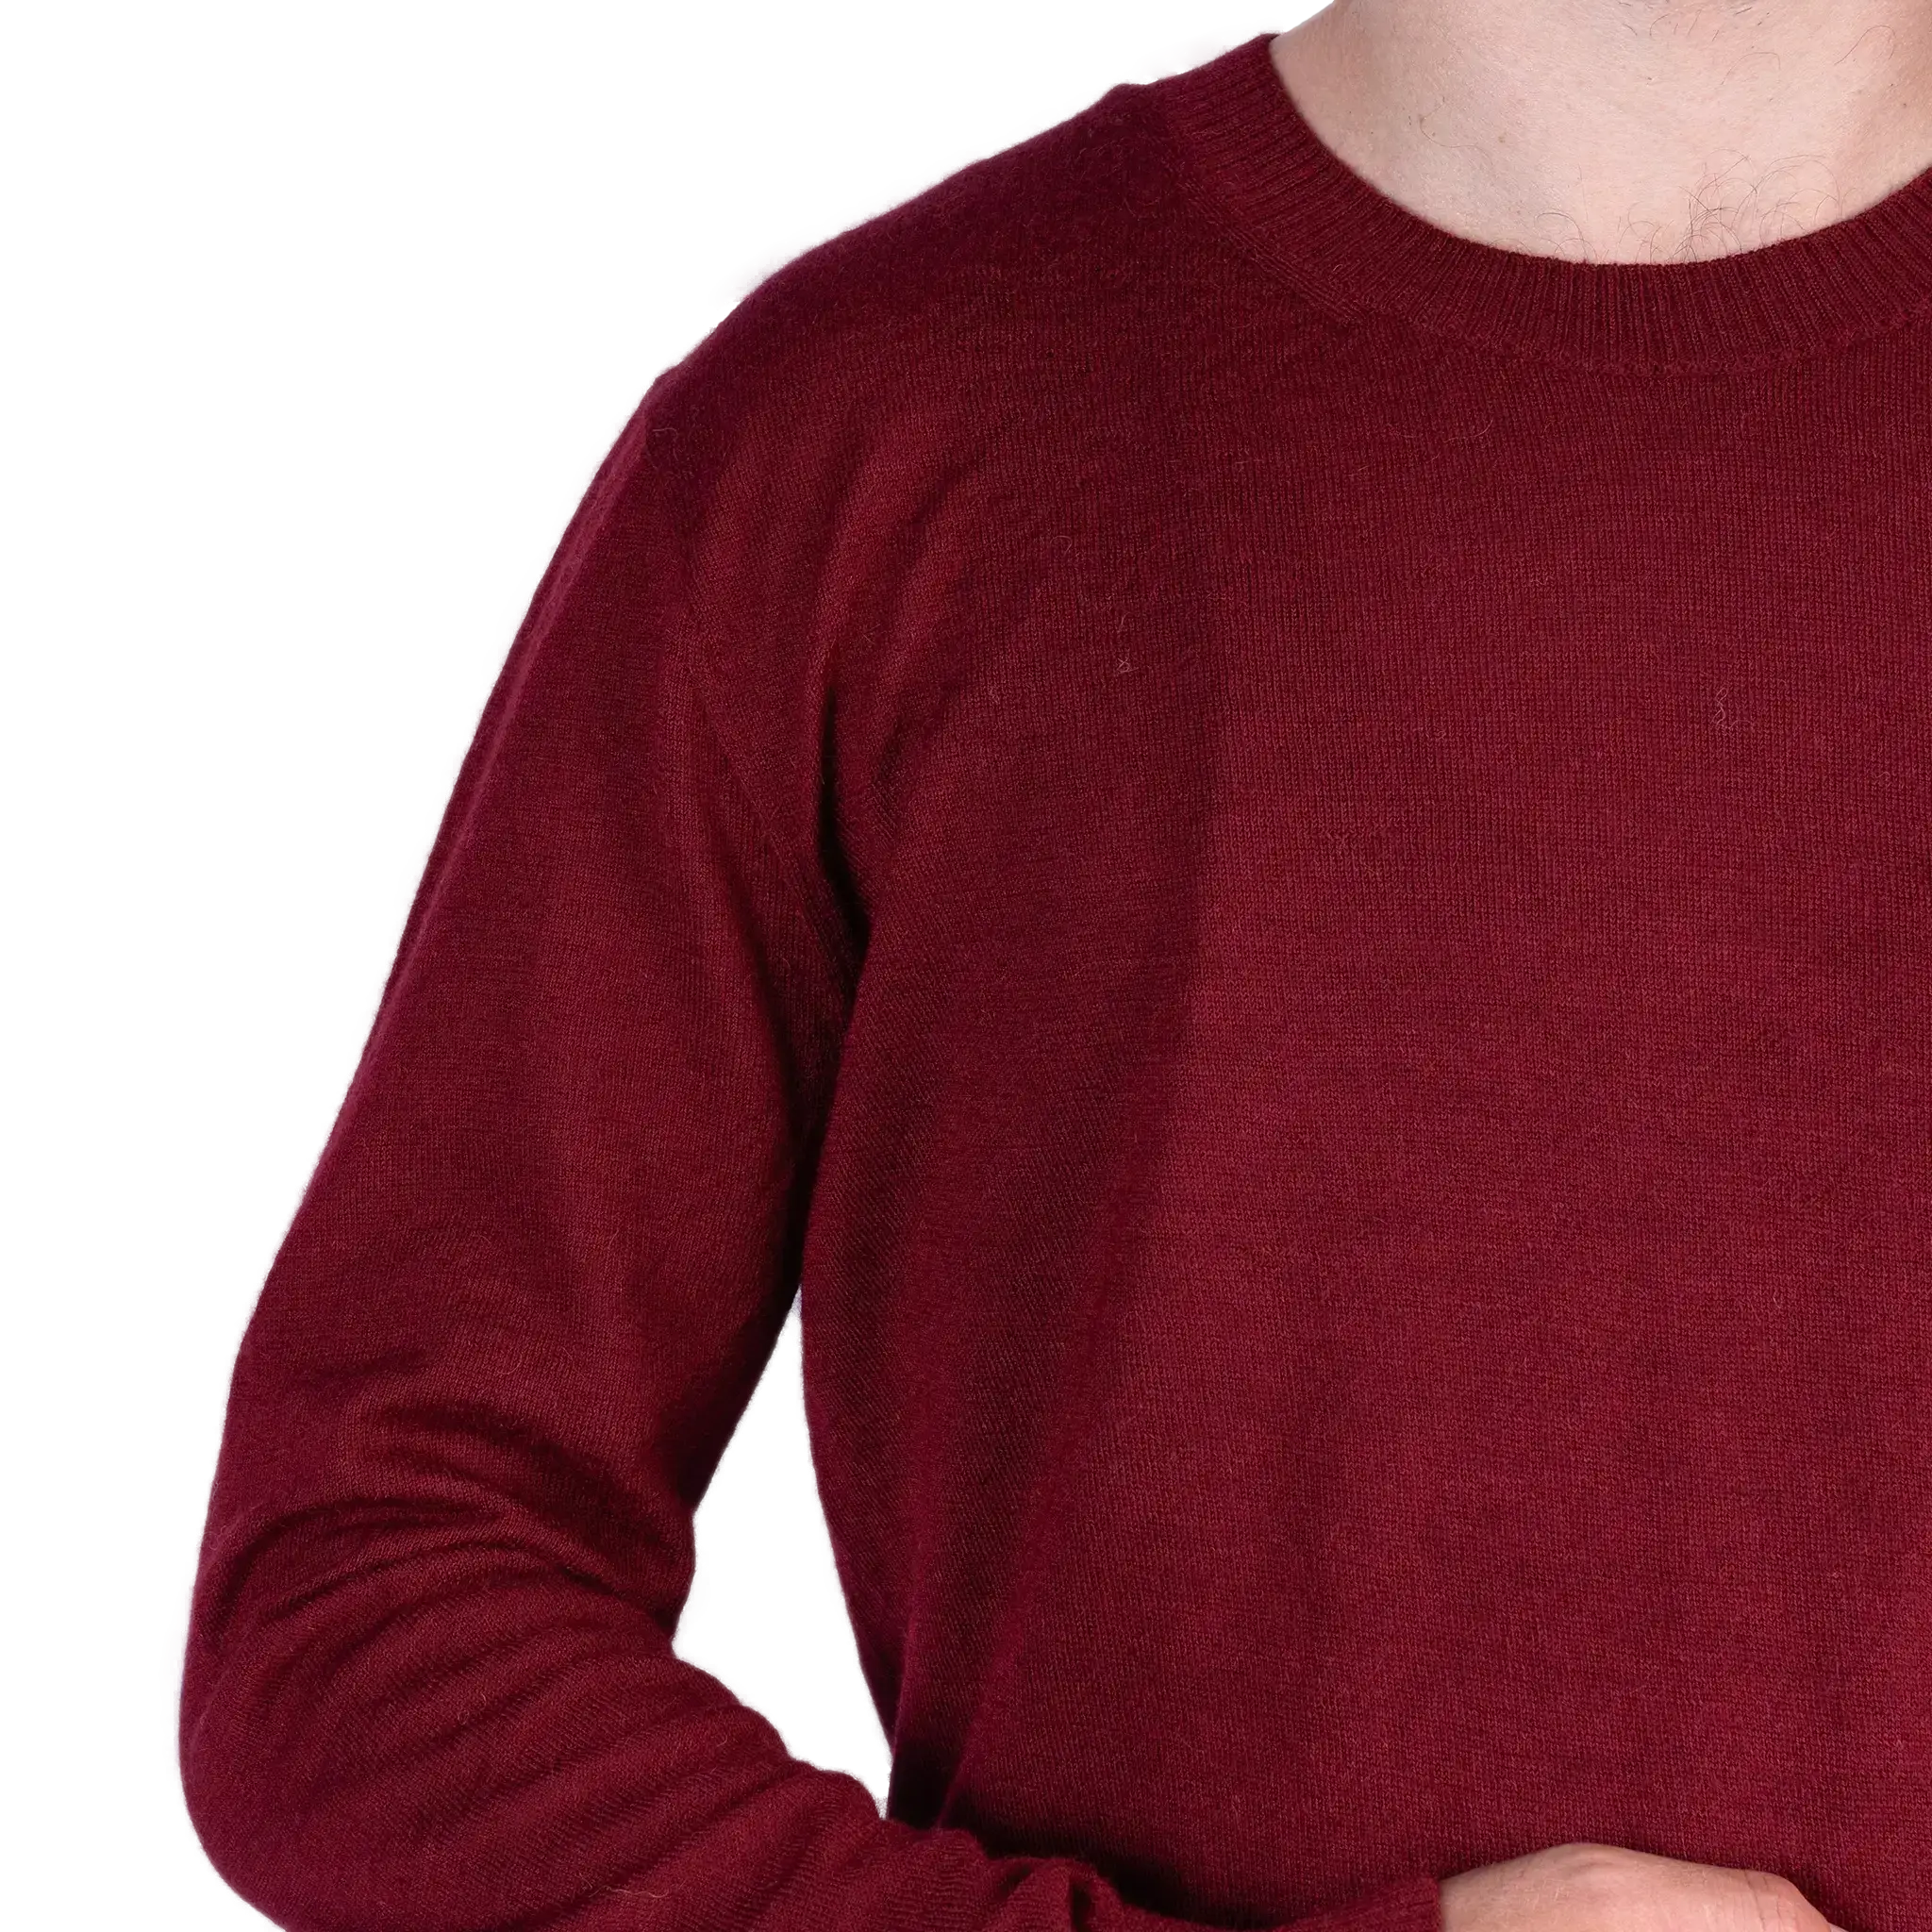 mens-alpaca-wool-sweater-ultra-soft-color-red-product-page.webp__PID:af733d91-be17-4512-ac9e-a645fc6e8a16